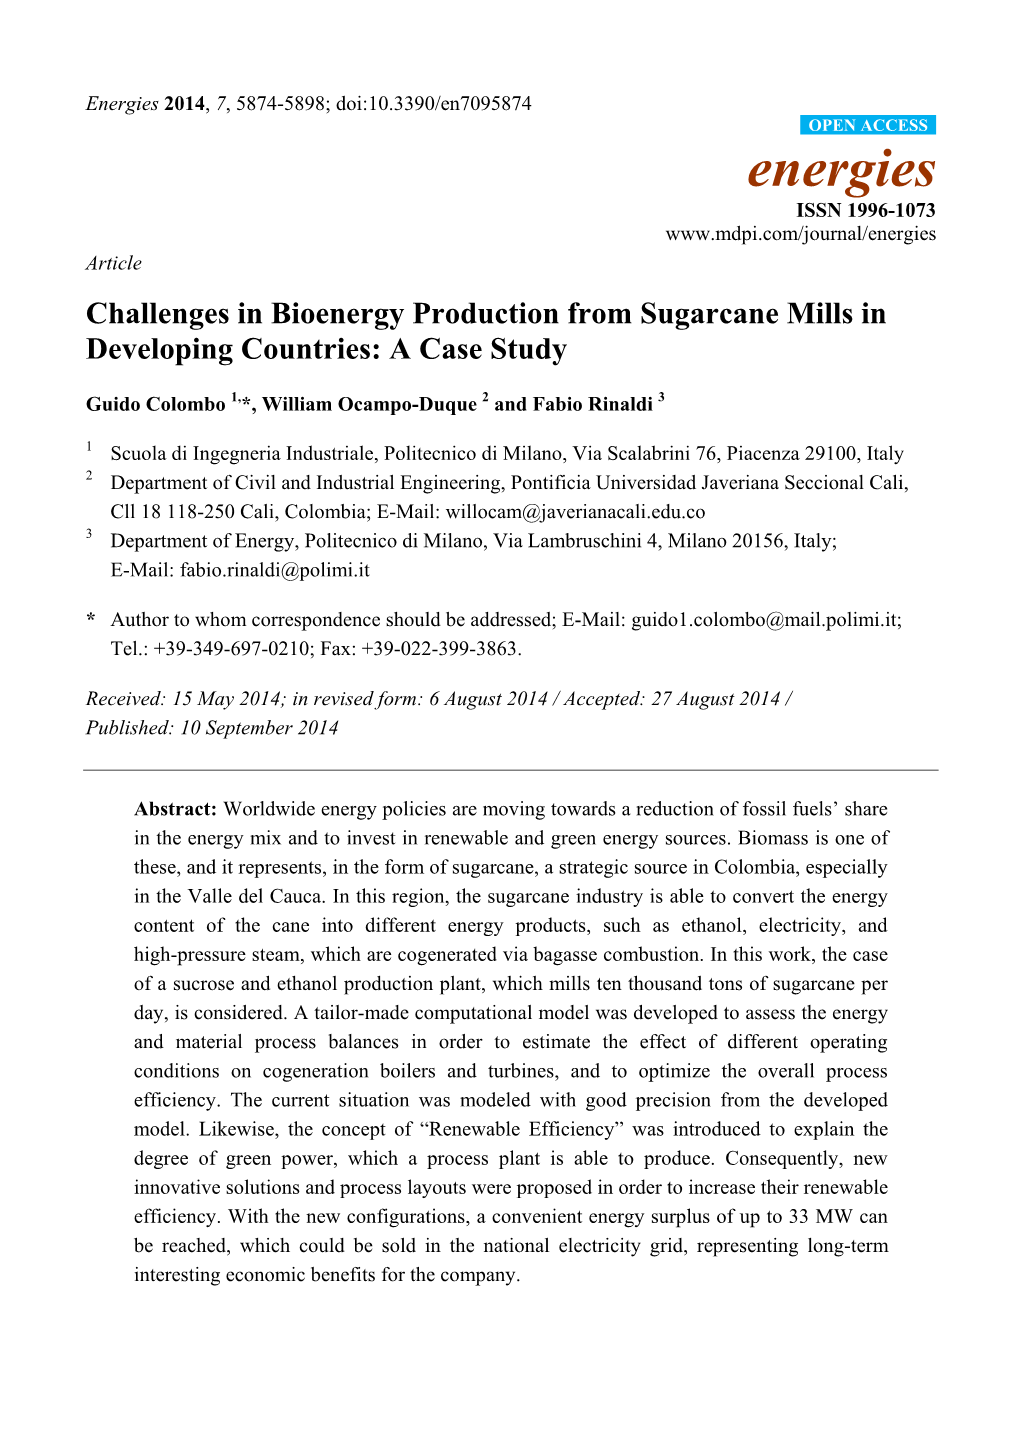 Challenges in Bioenergy Production from Sugarcane Mills in Developing Countries: a Case Study